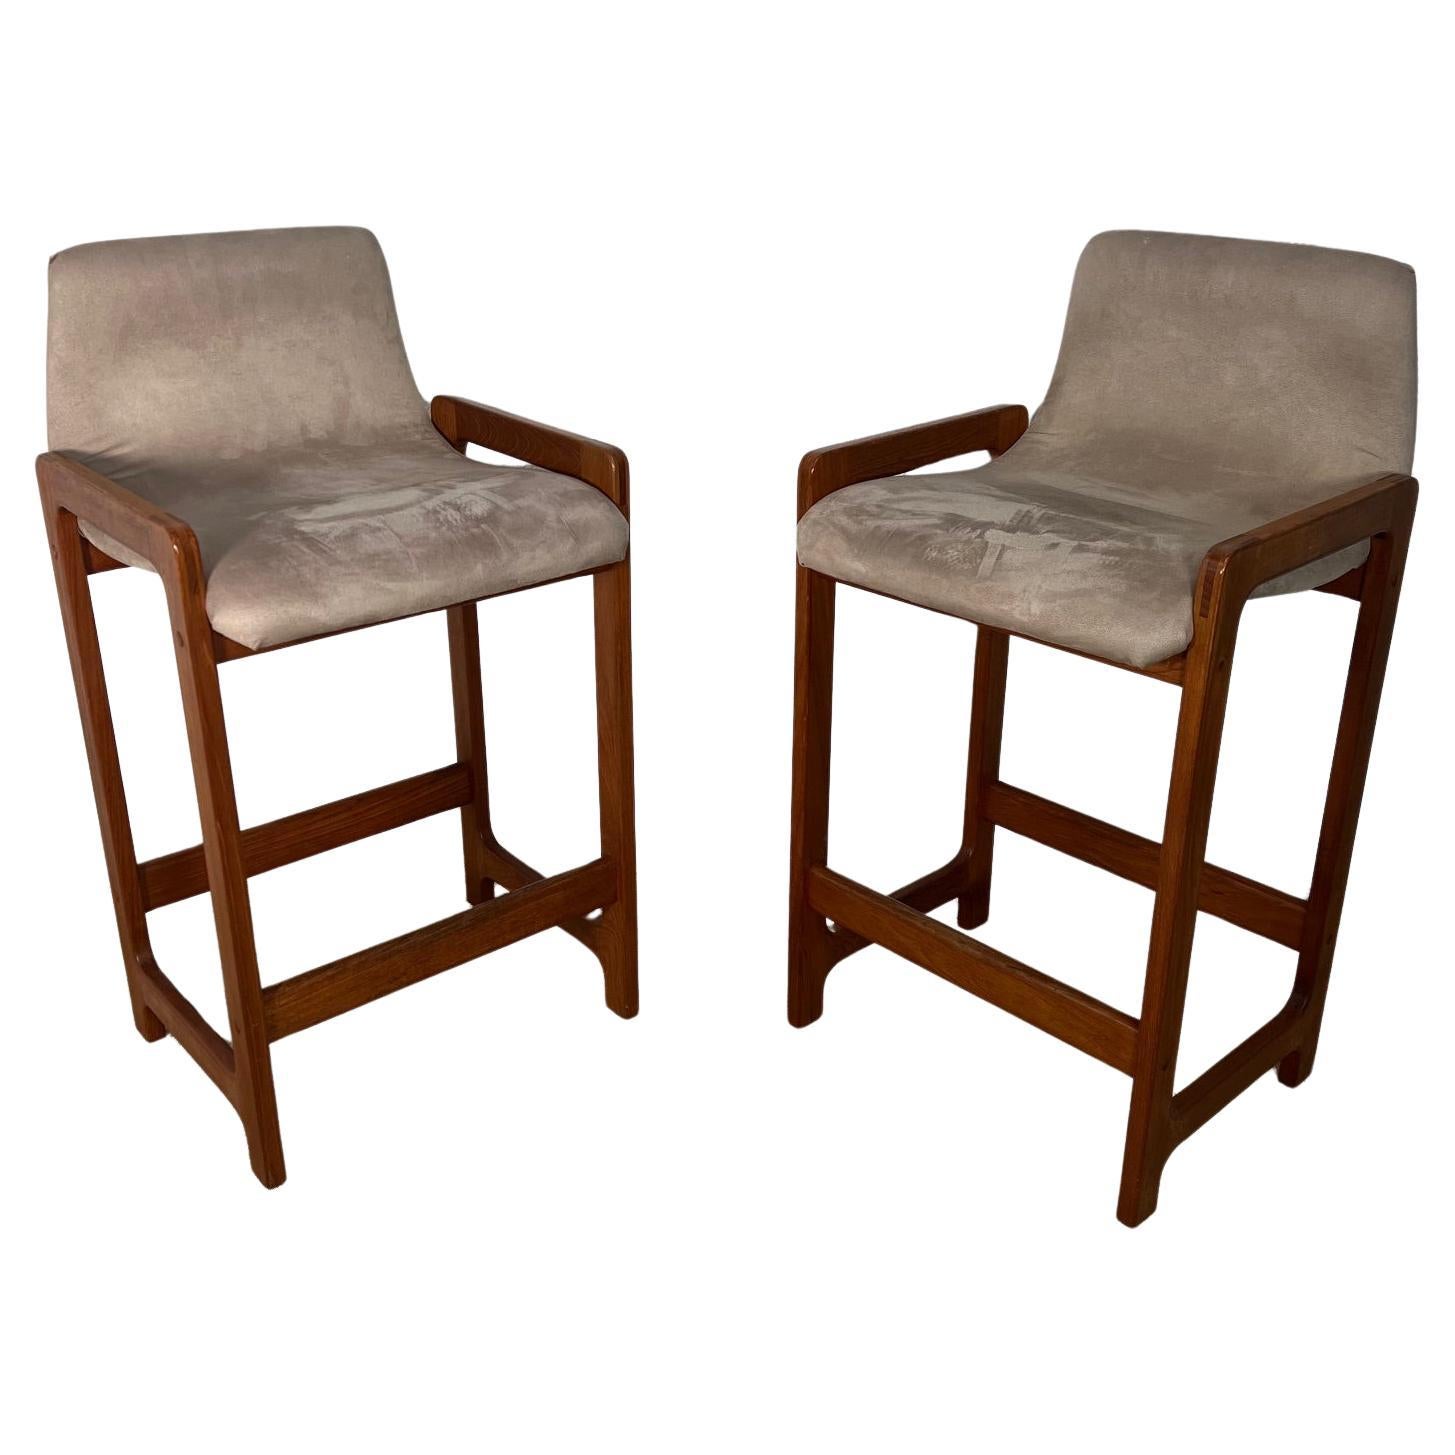 Pair Of Mid Century Modern Teak Bar Stools By D-Scan Counter Height